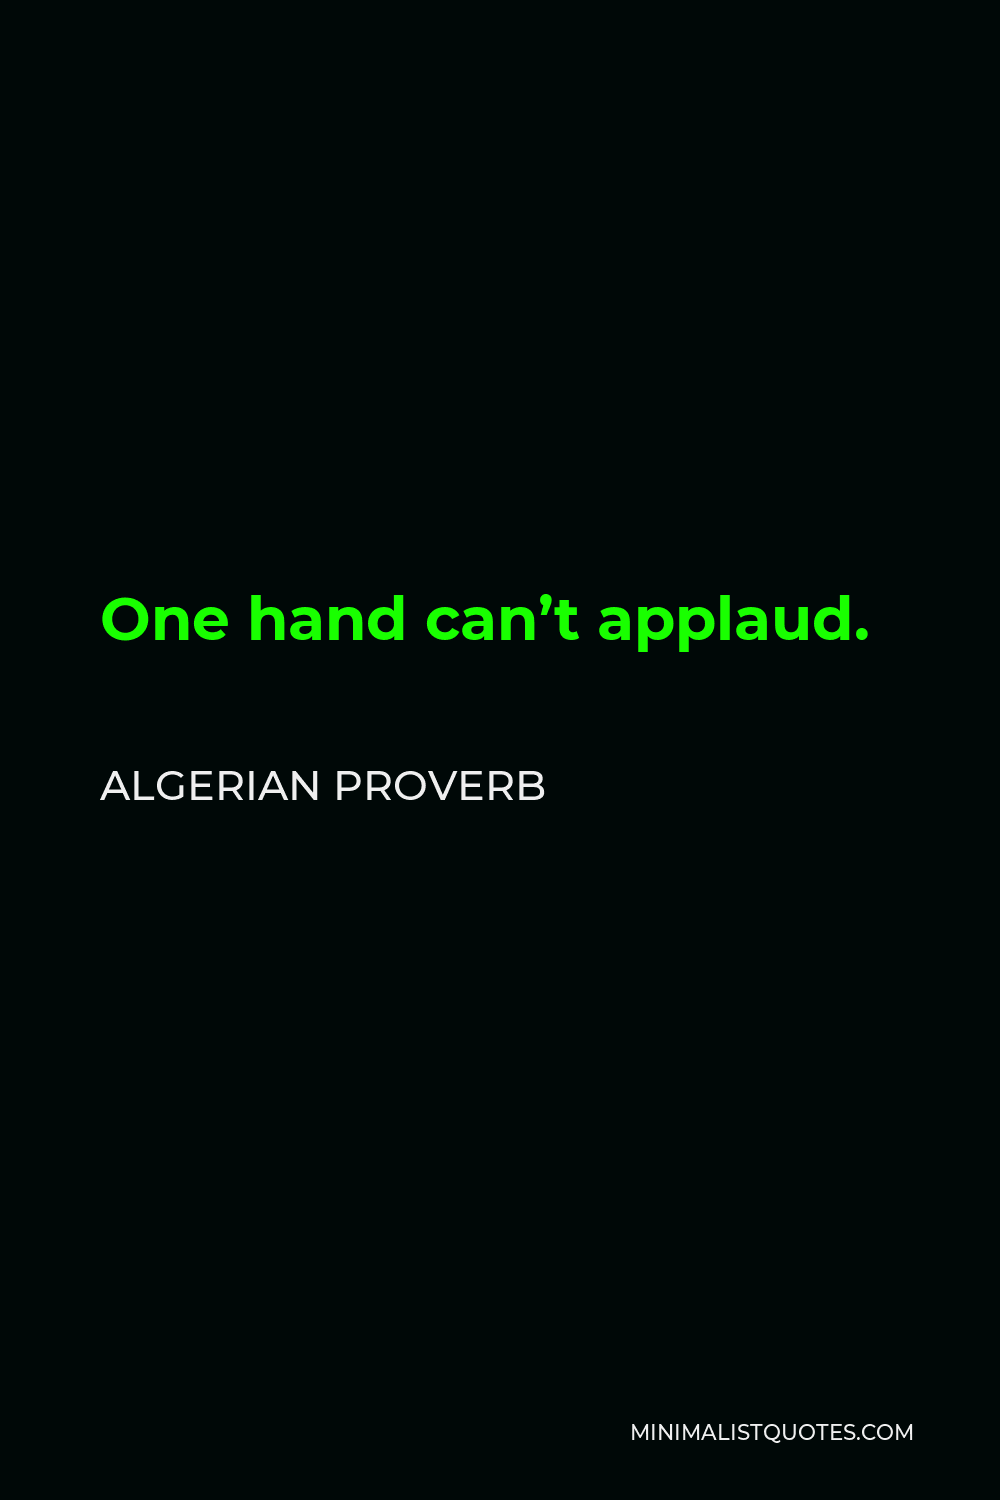 Algerian Proverb Quote - One hand can’t applaud.